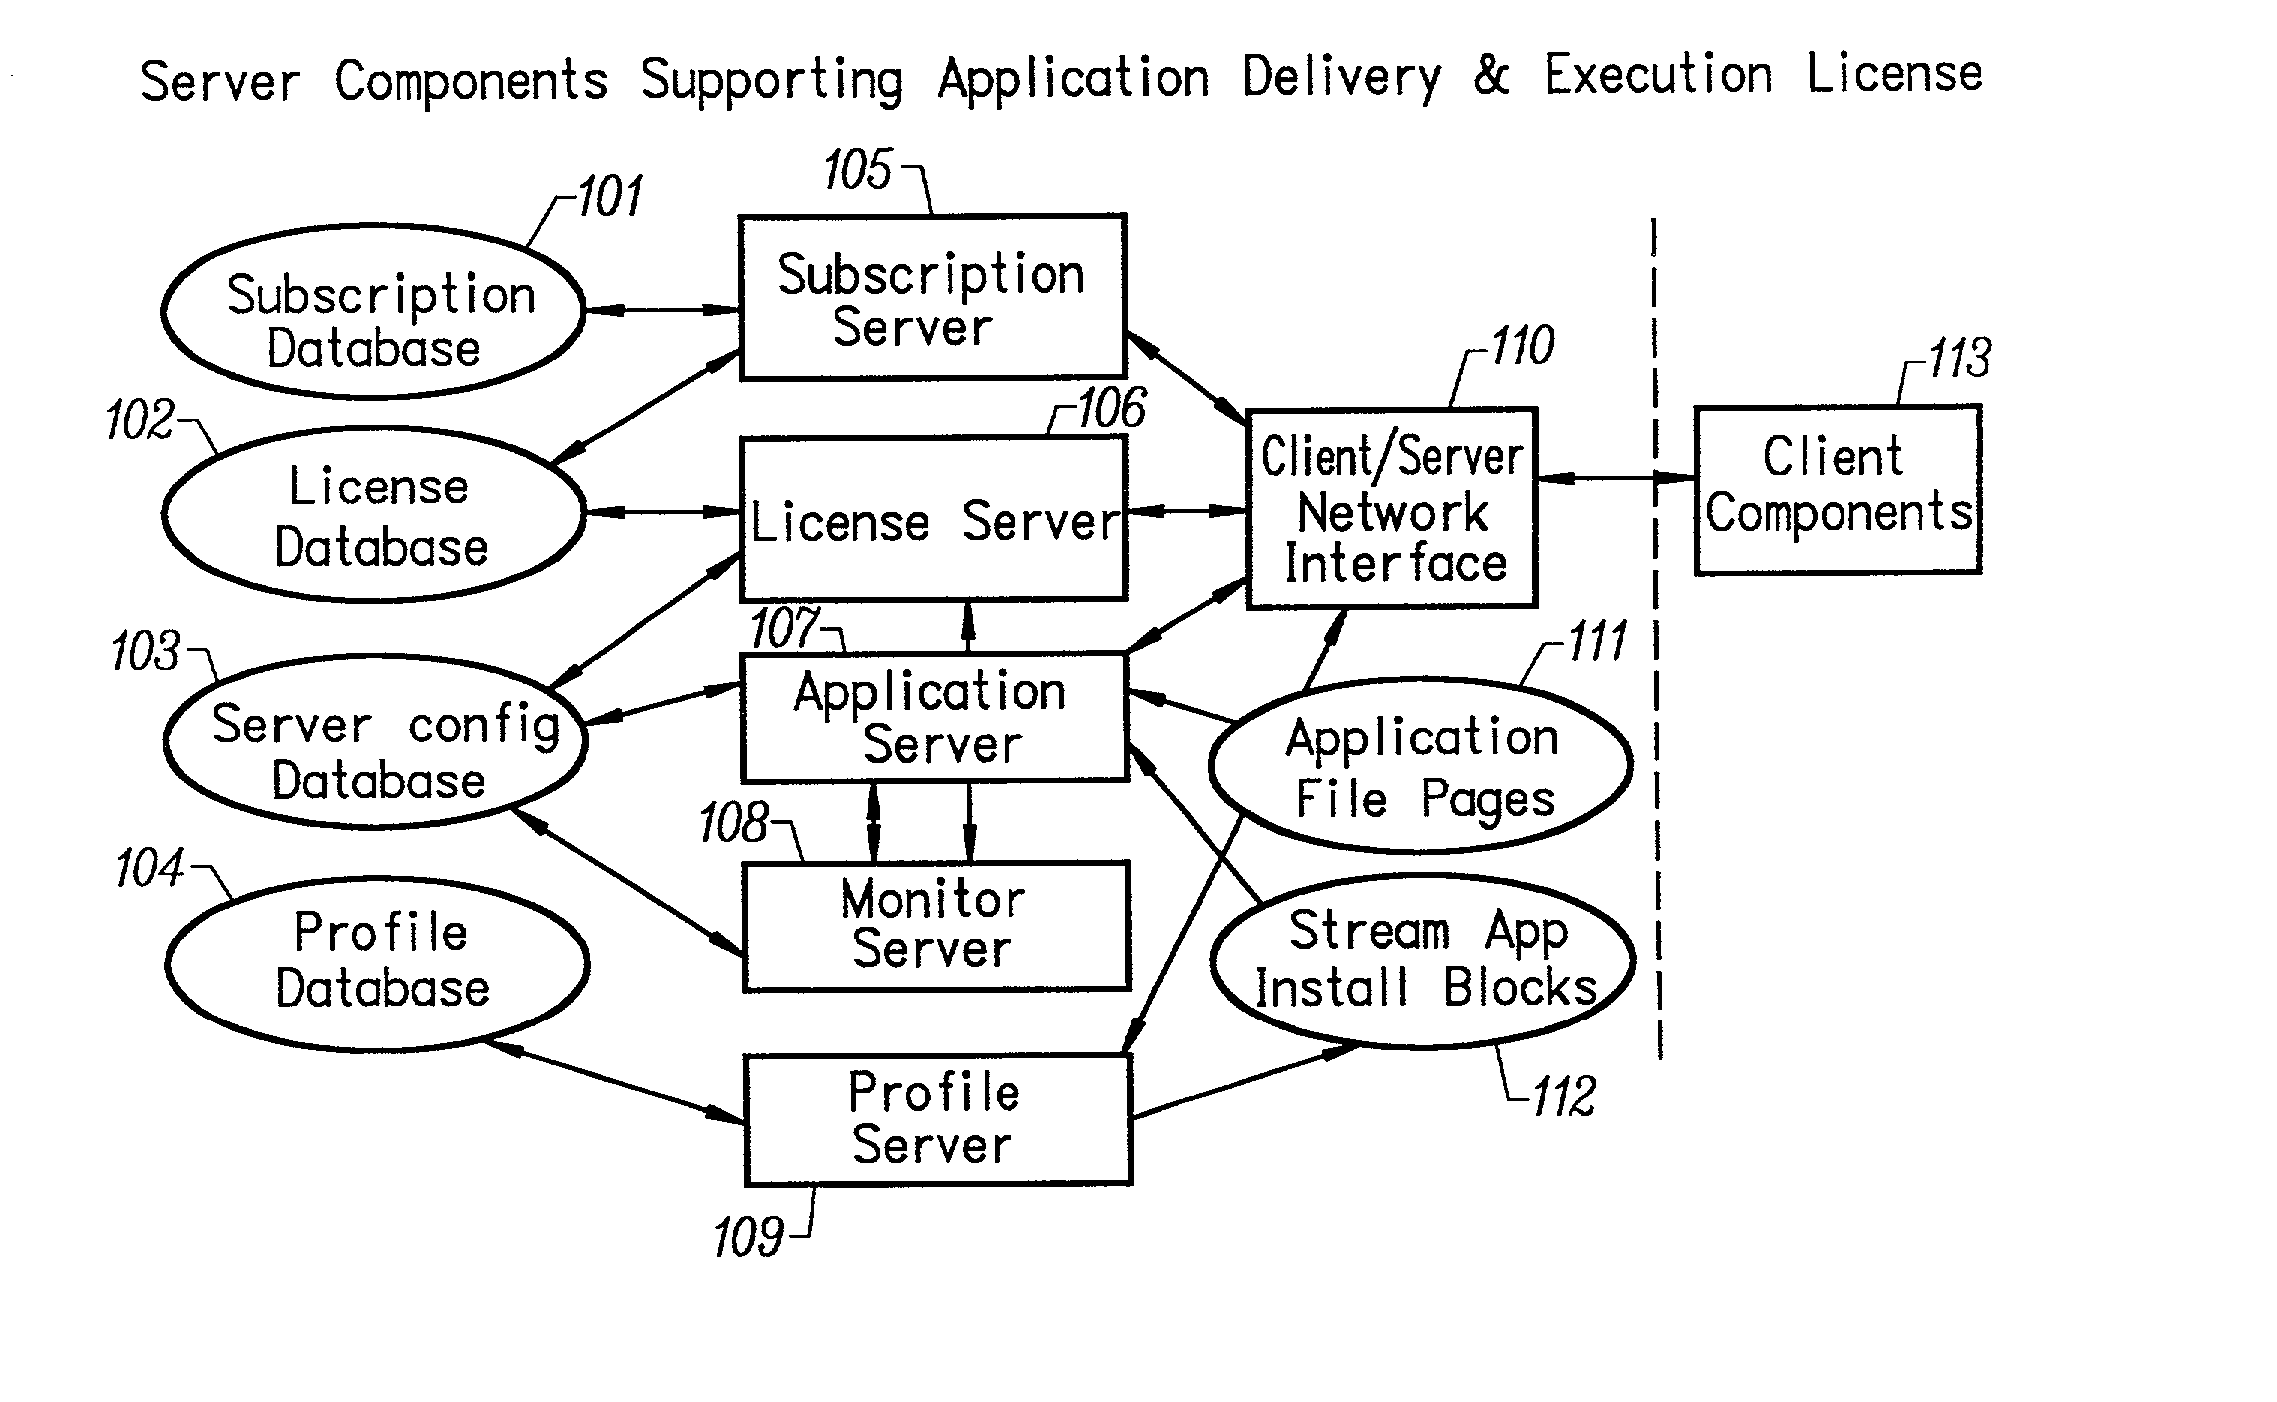 Conventionally coded application conversion system for streamed delivery and execution